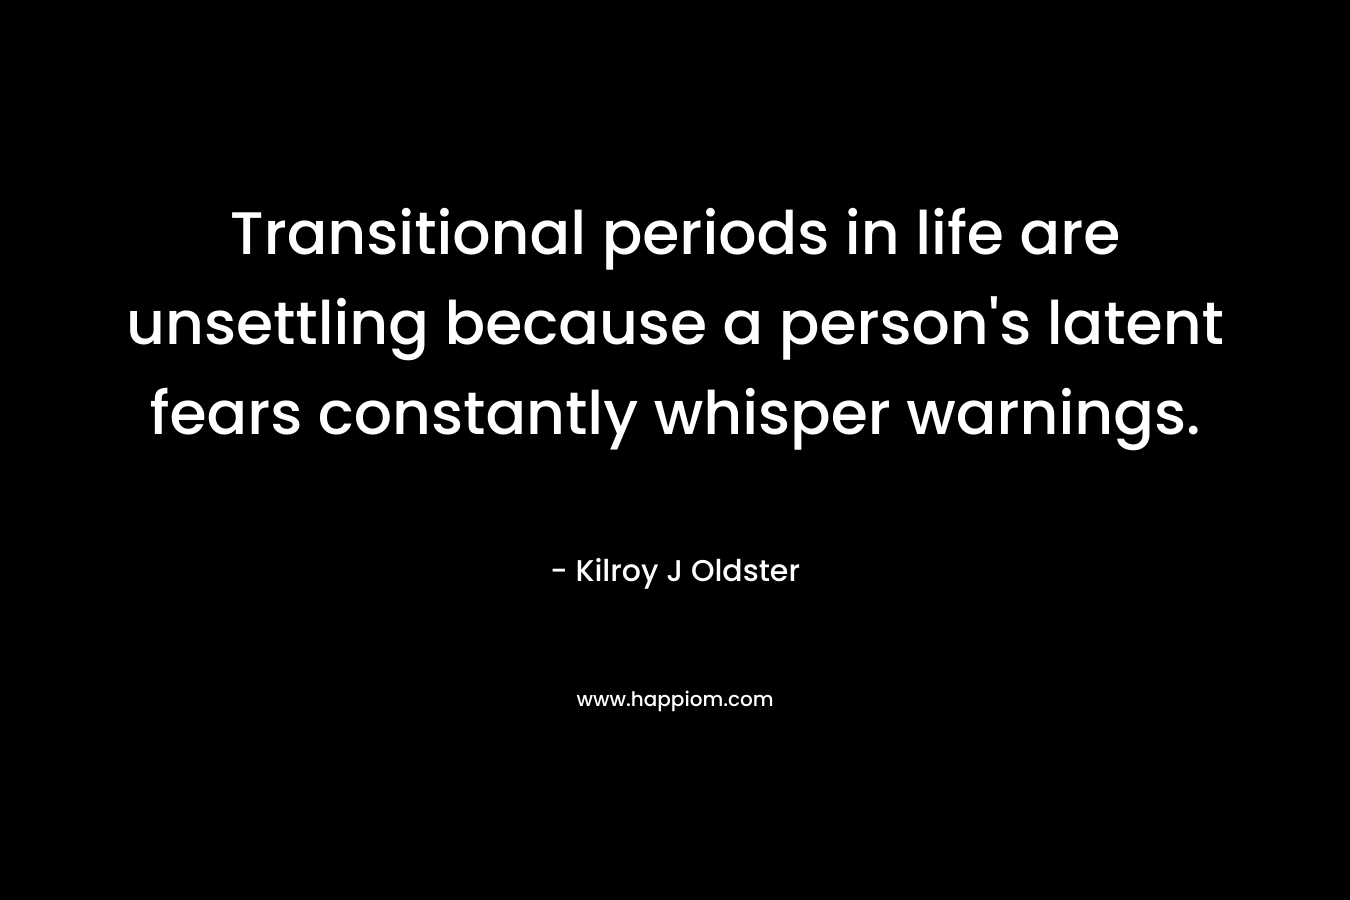 Transitional periods in life are unsettling because a person's latent fears constantly whisper warnings.